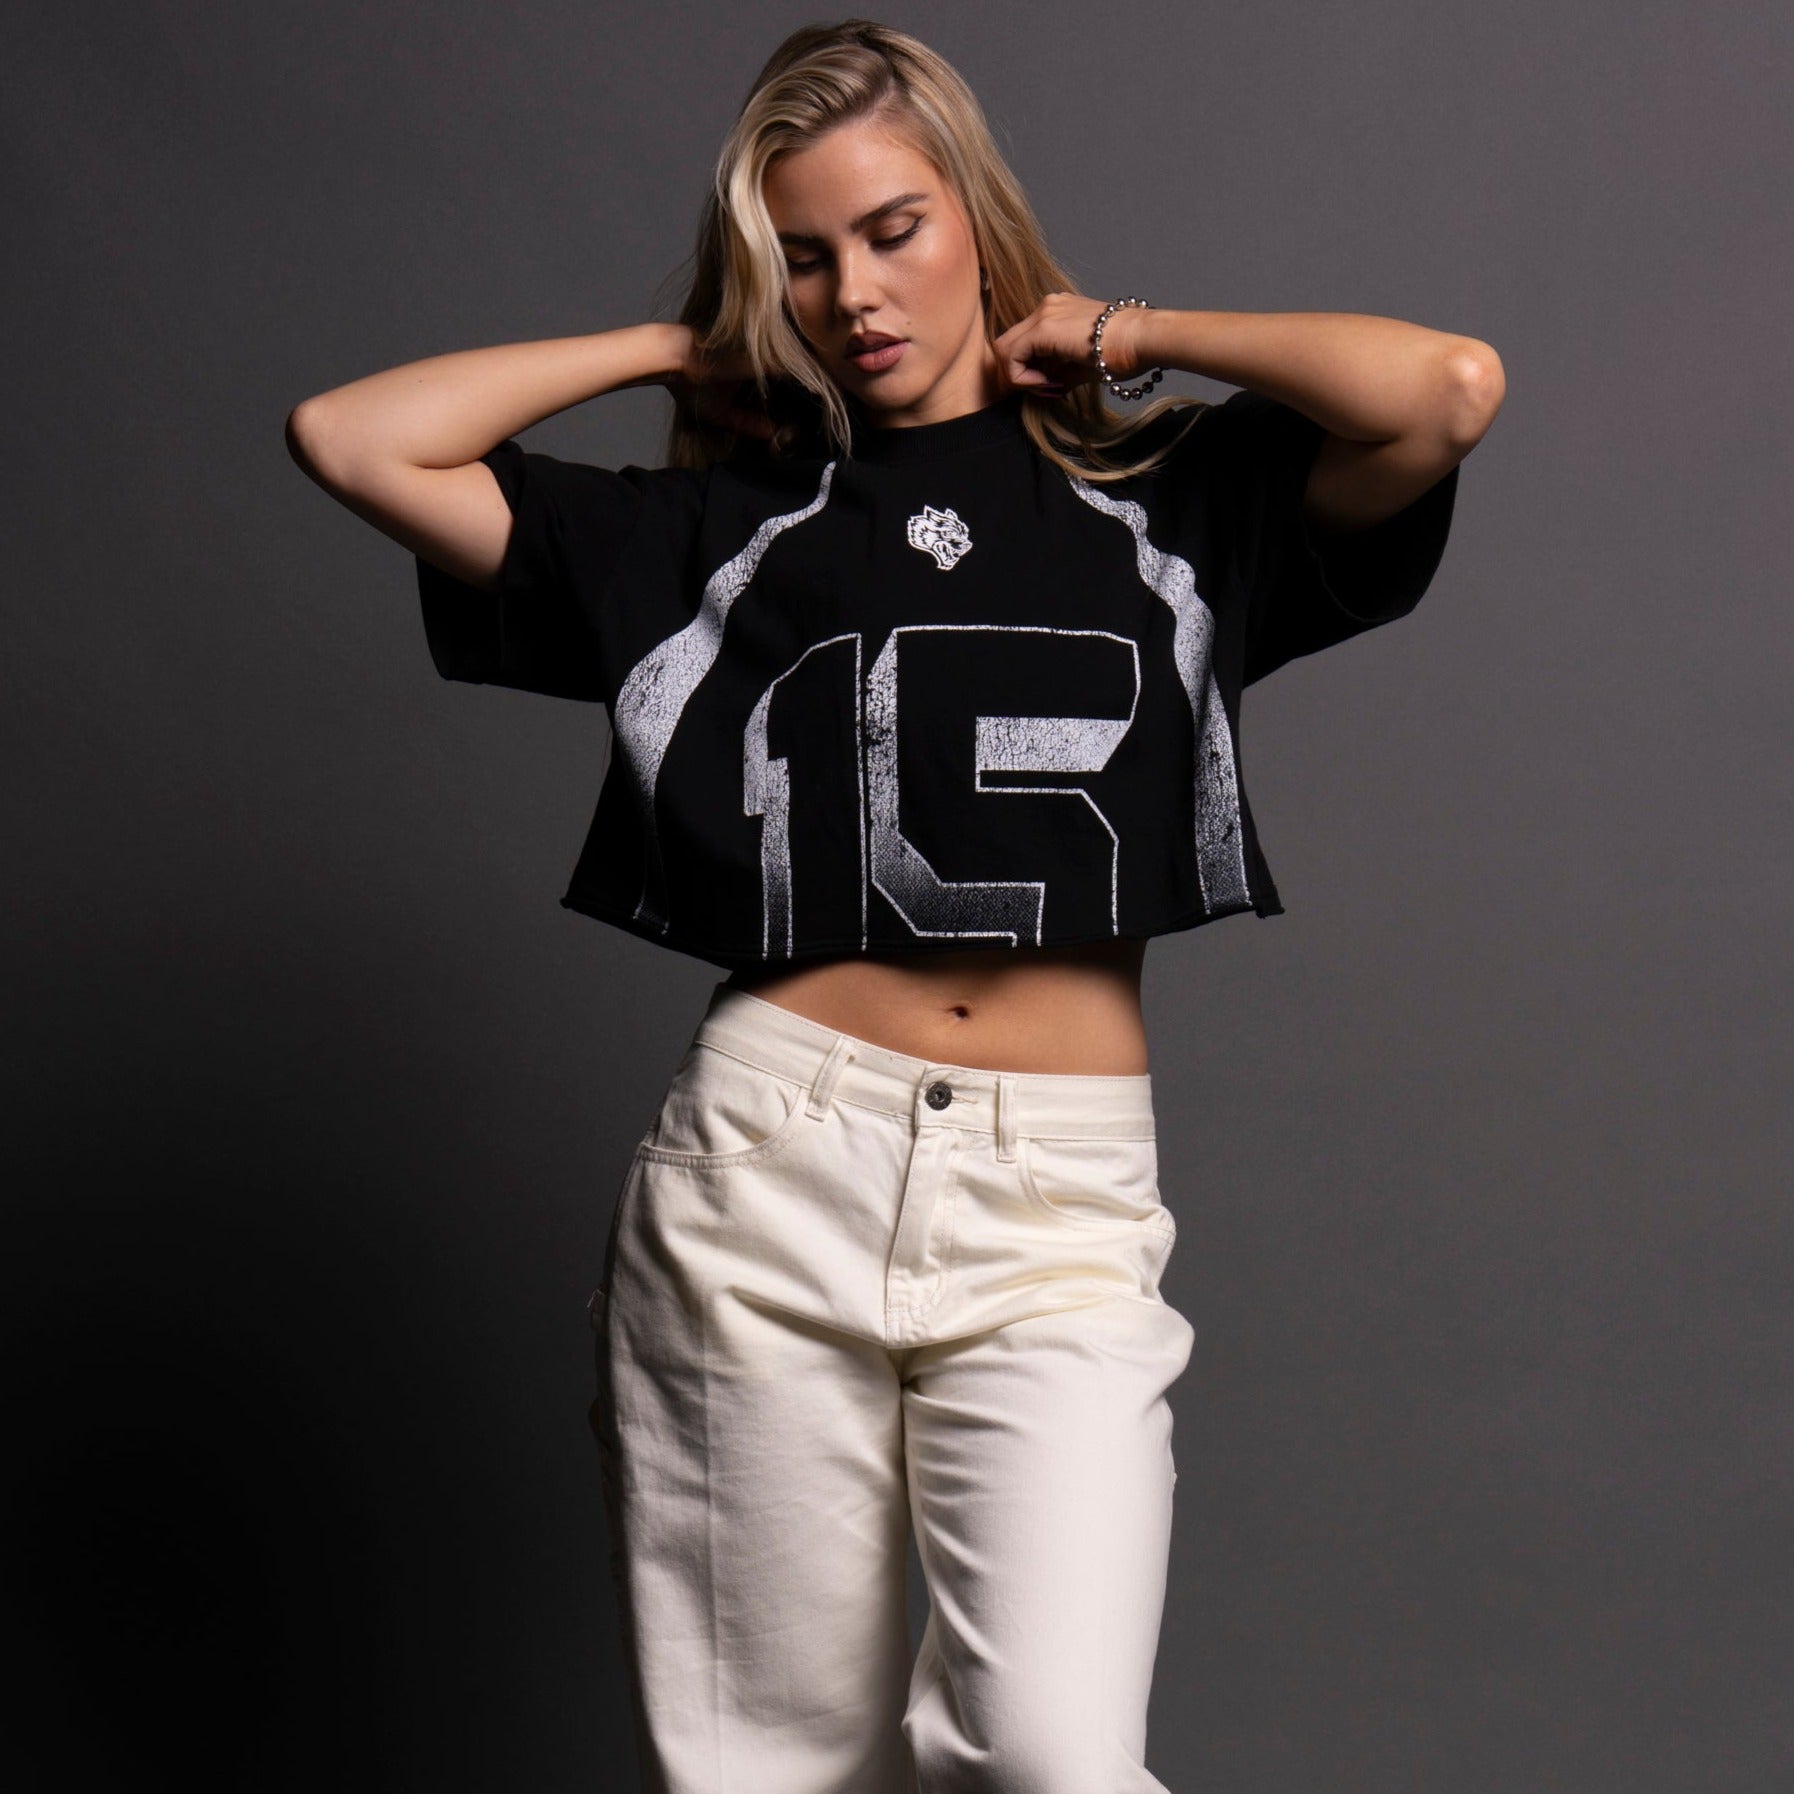 She Game Time "Premium" Oversized (Cropped) Tee in Black